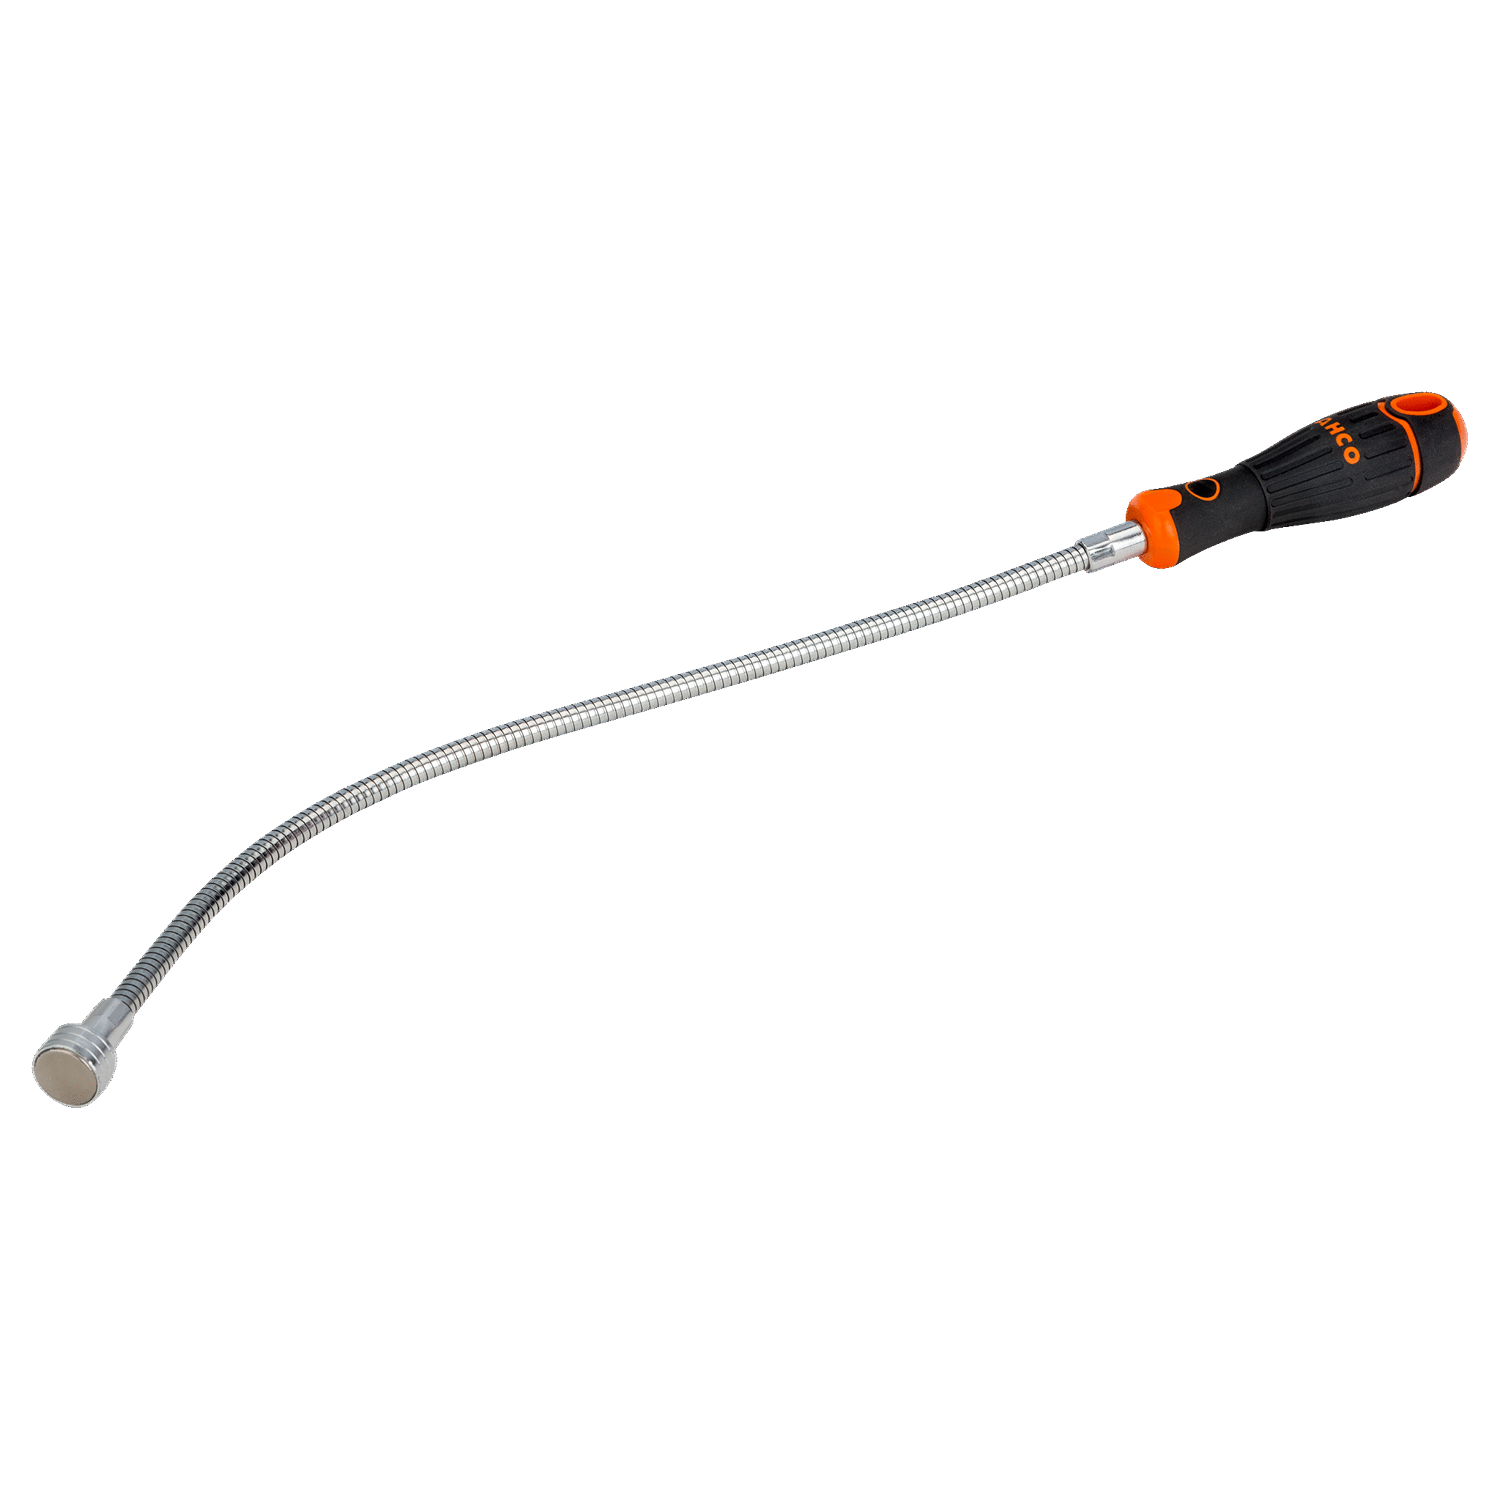 BAHCO B147 BahcoFit Flexible Magnetic Puller with Rubber Grip - Premium Magnetic Puller from BAHCO - Shop now at Yew Aik.